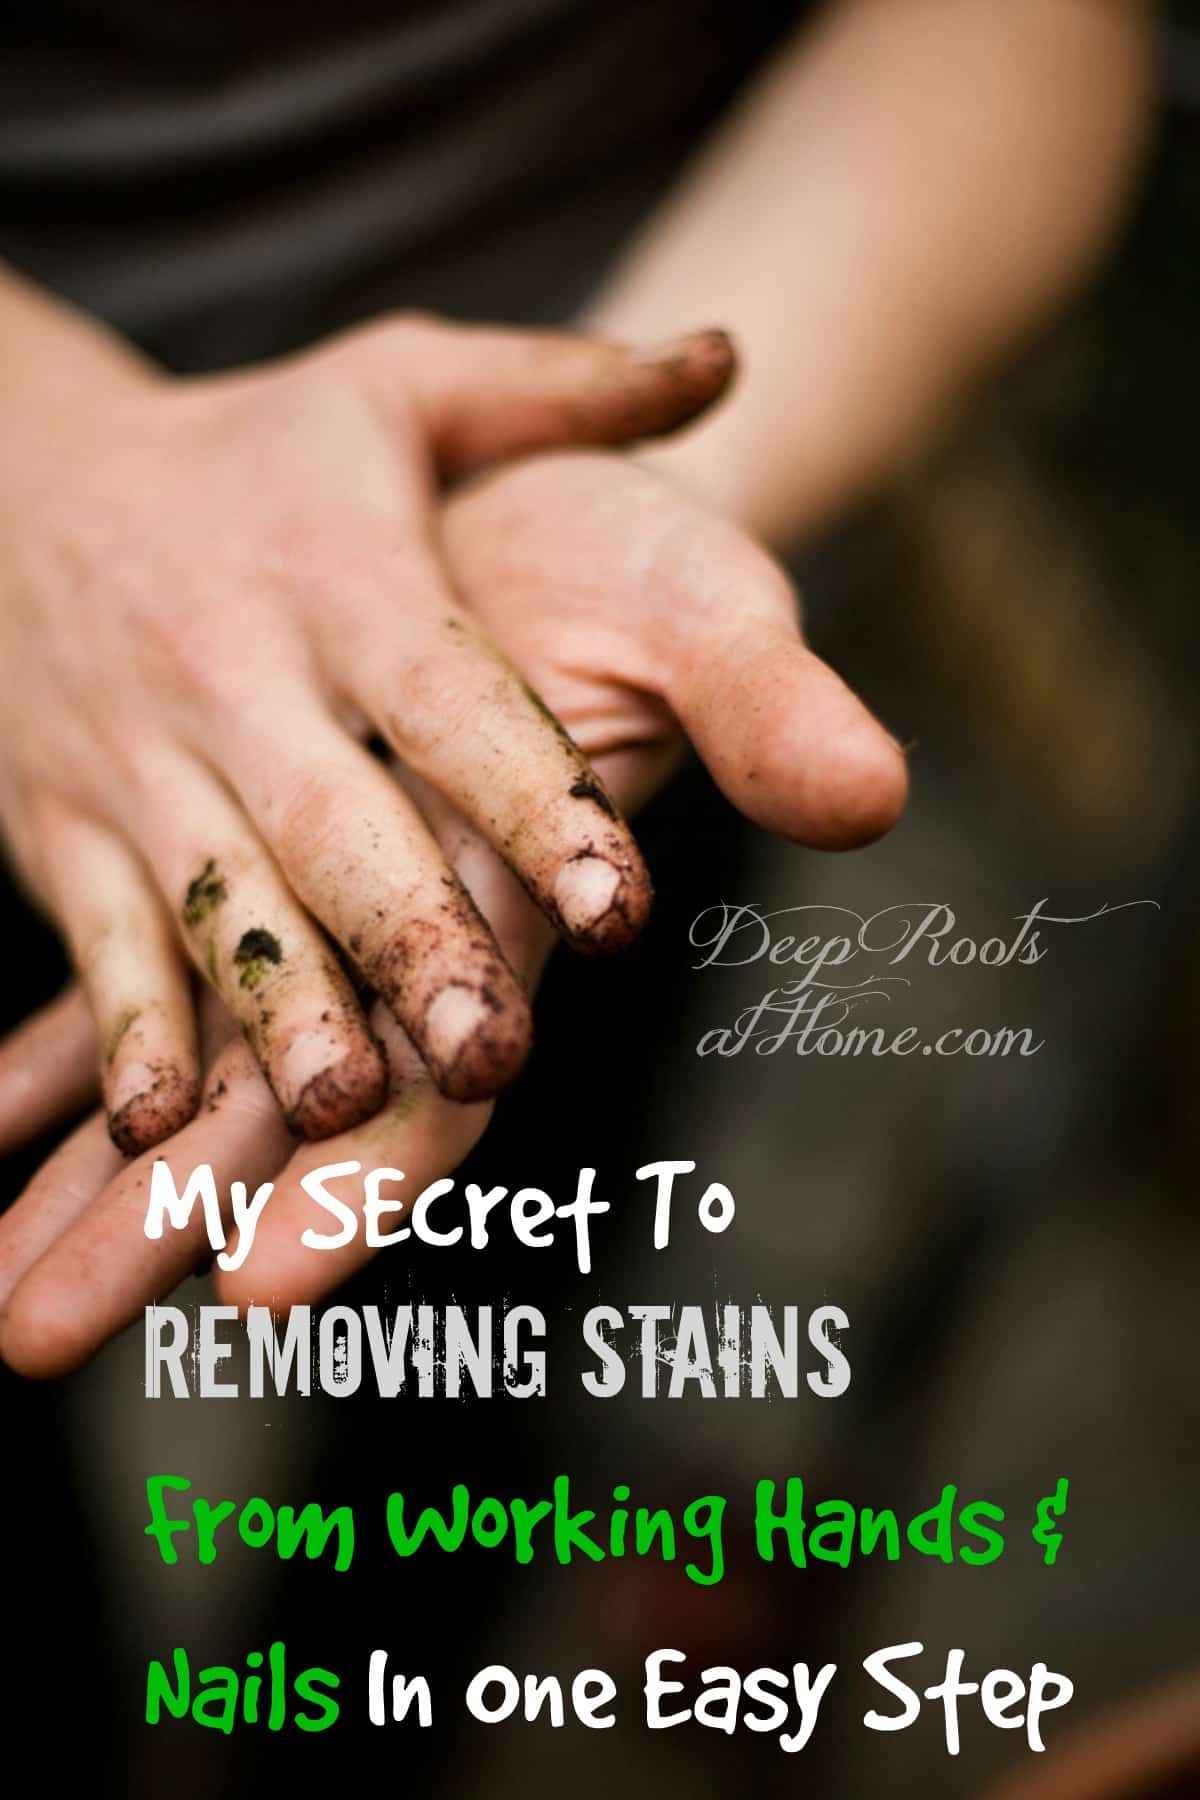 Remove Stains From Working Hands & Nails In One Easy Step, hands, work worn hands, gardeners, farmers, mechanics, to remove dyes, Mother's hands, Velveteen Rabbit, stay at home moms, embarrassed, yard work, don't wear gloves, work in yard, gritty hand cleaners, GOJO, chemicals, harsh cleaners, lemon juice, citric acid, fades scars, astringent, disinfecting properties, cuts, scrapes, soap and water, directions, 